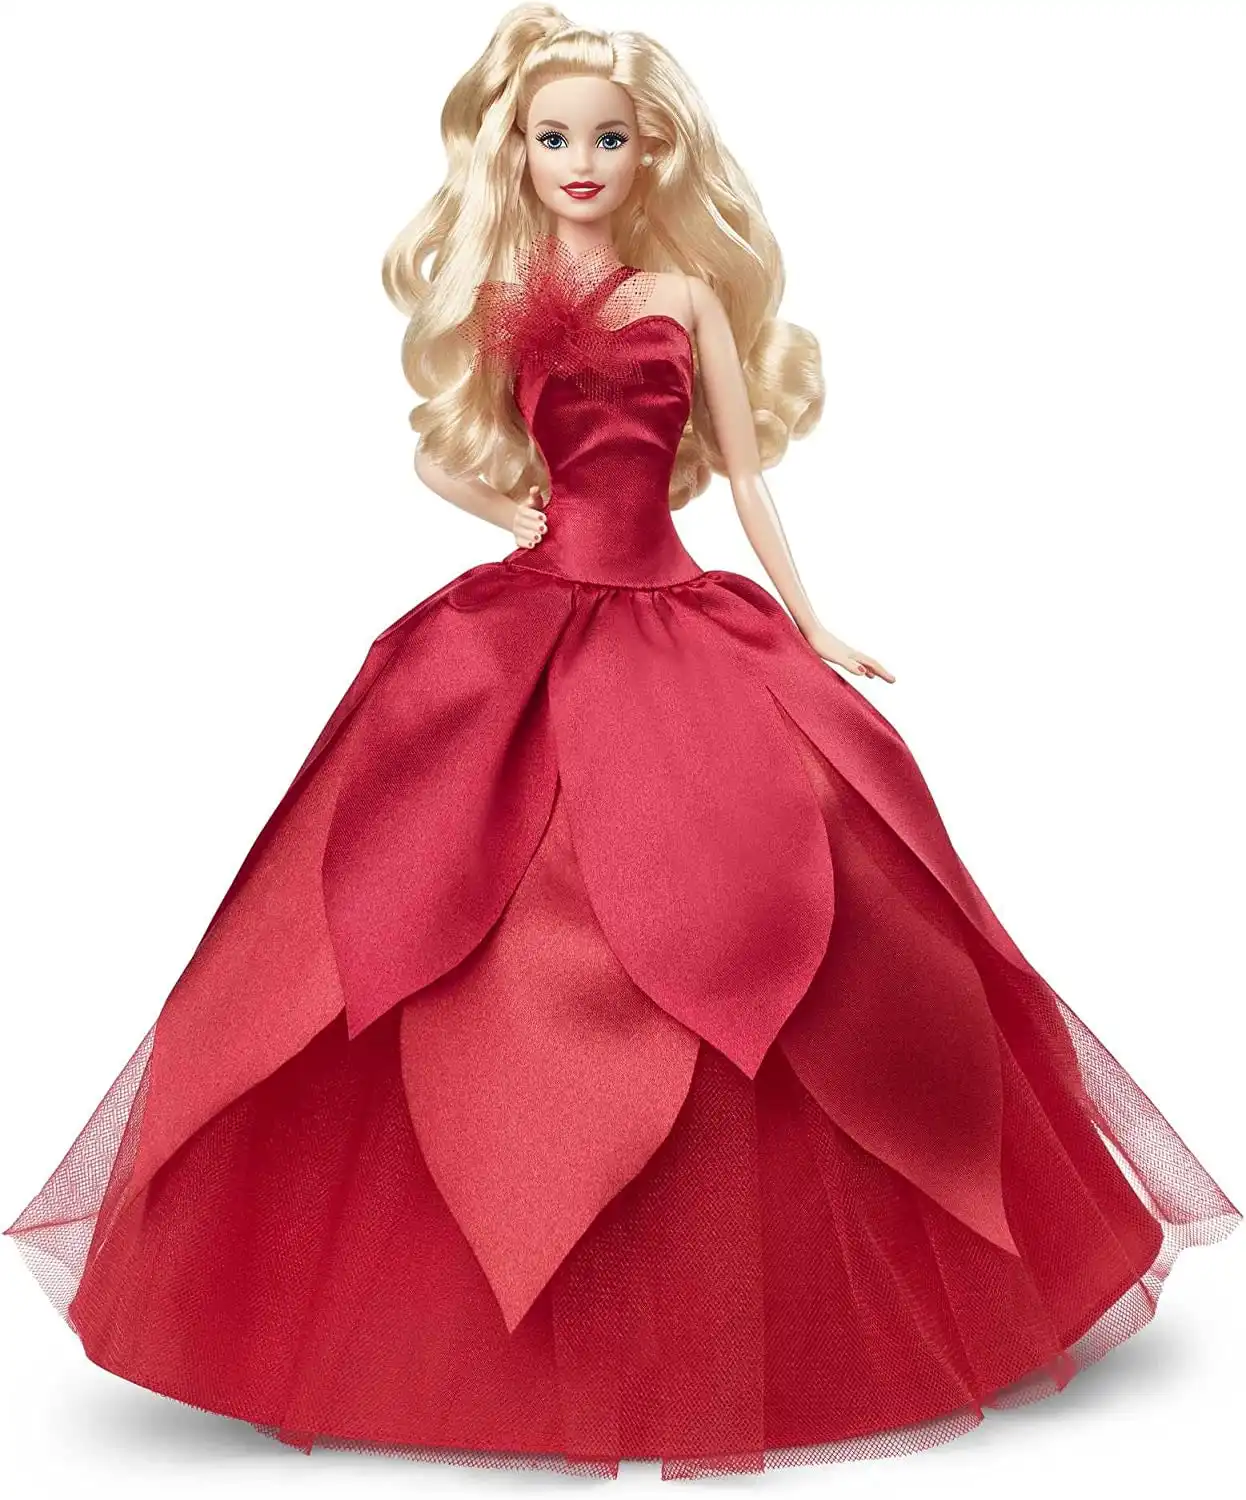 Barbie Signature 2022 Holiday Barbie Doll Blonde Hair